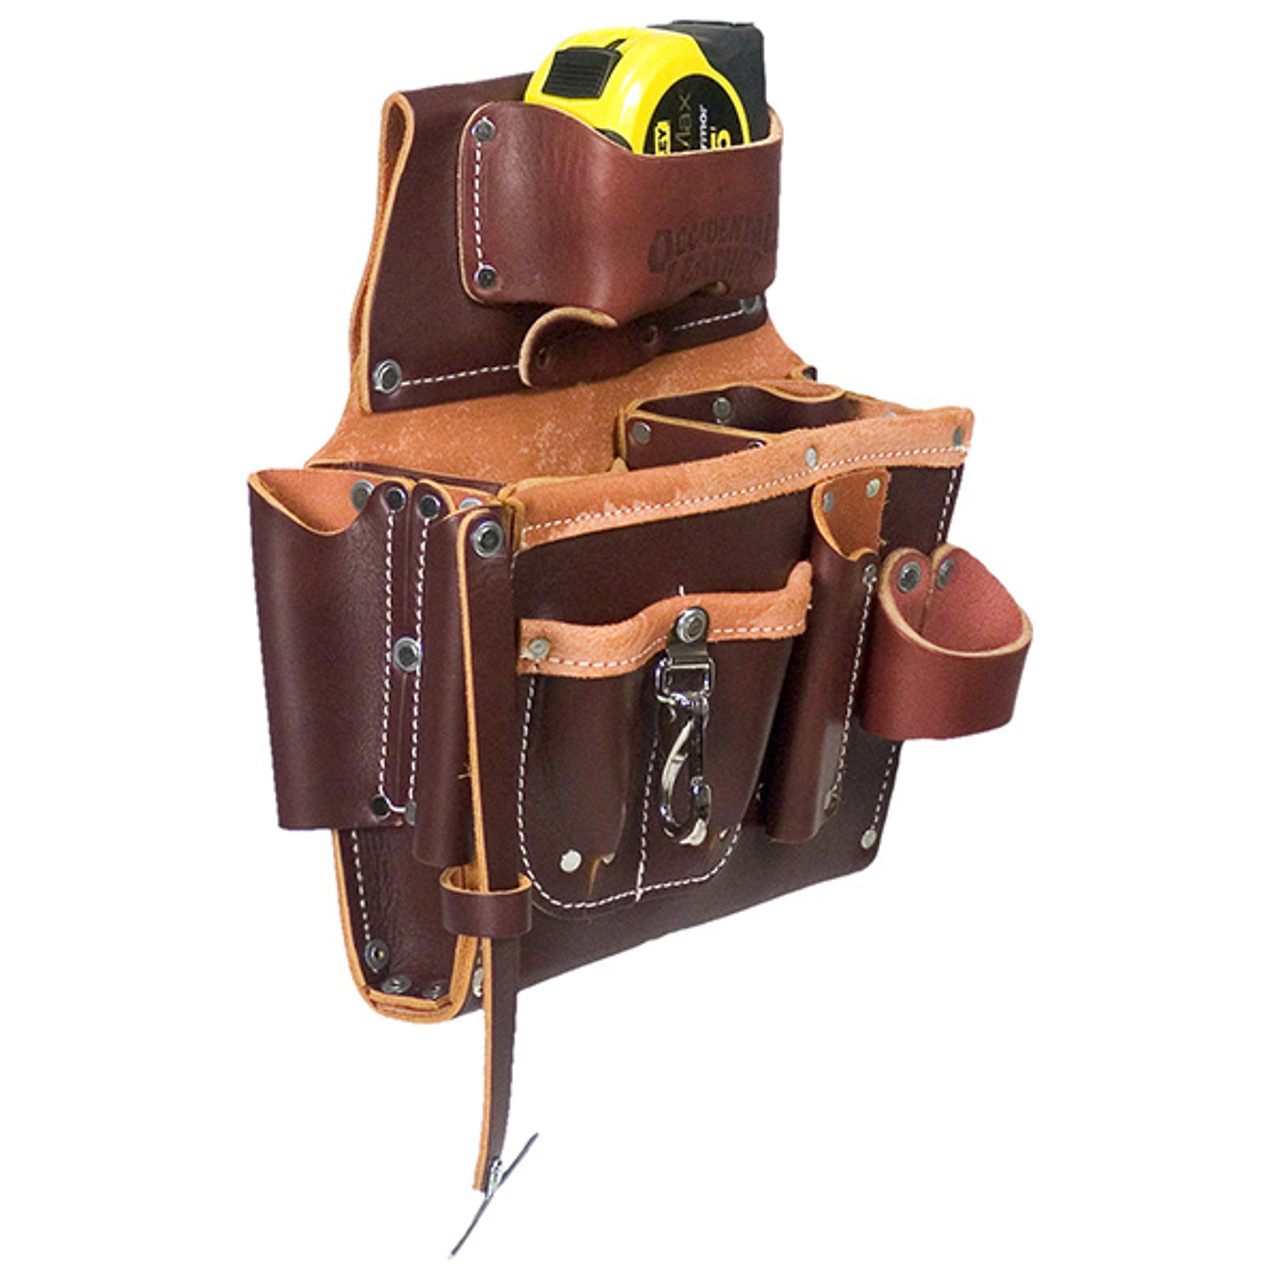 Occidental Leather 5085 - ELECTRICIAN'S TOOL CASE Leather